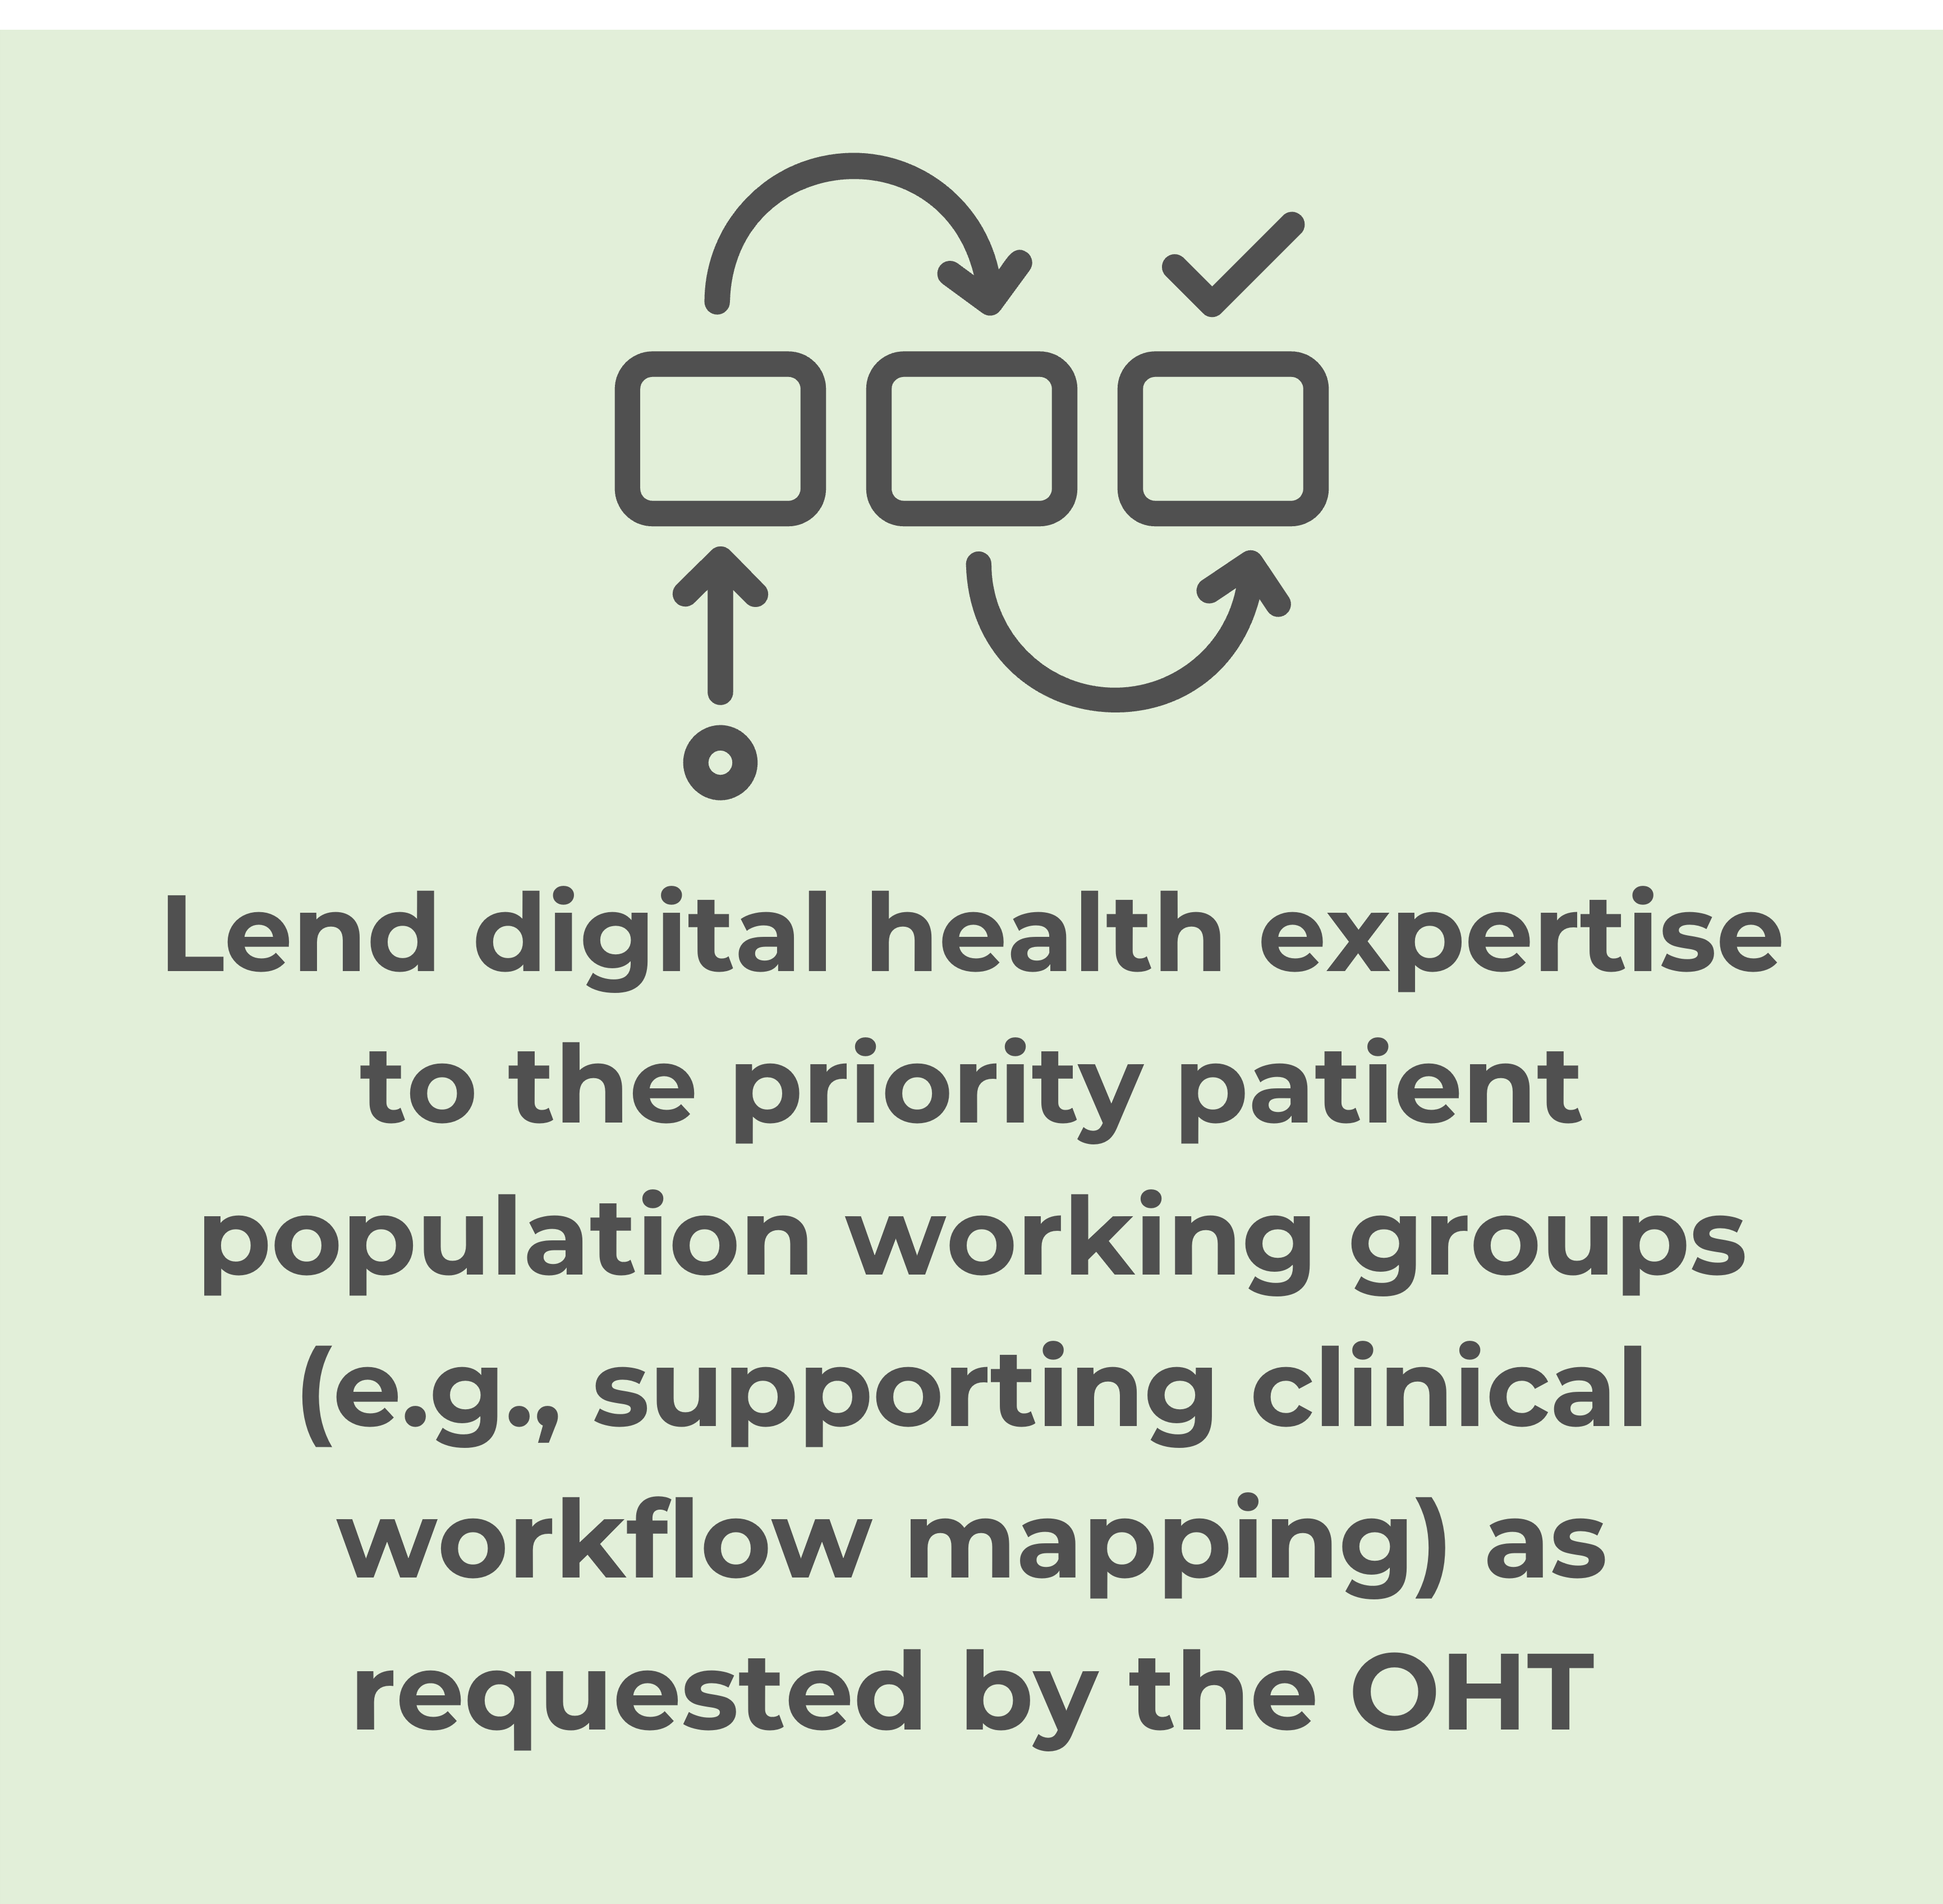 Lend digital health expertise to the priority patient population working groups (e.g., supporting clinical workflow mapping) as requested by the OHT